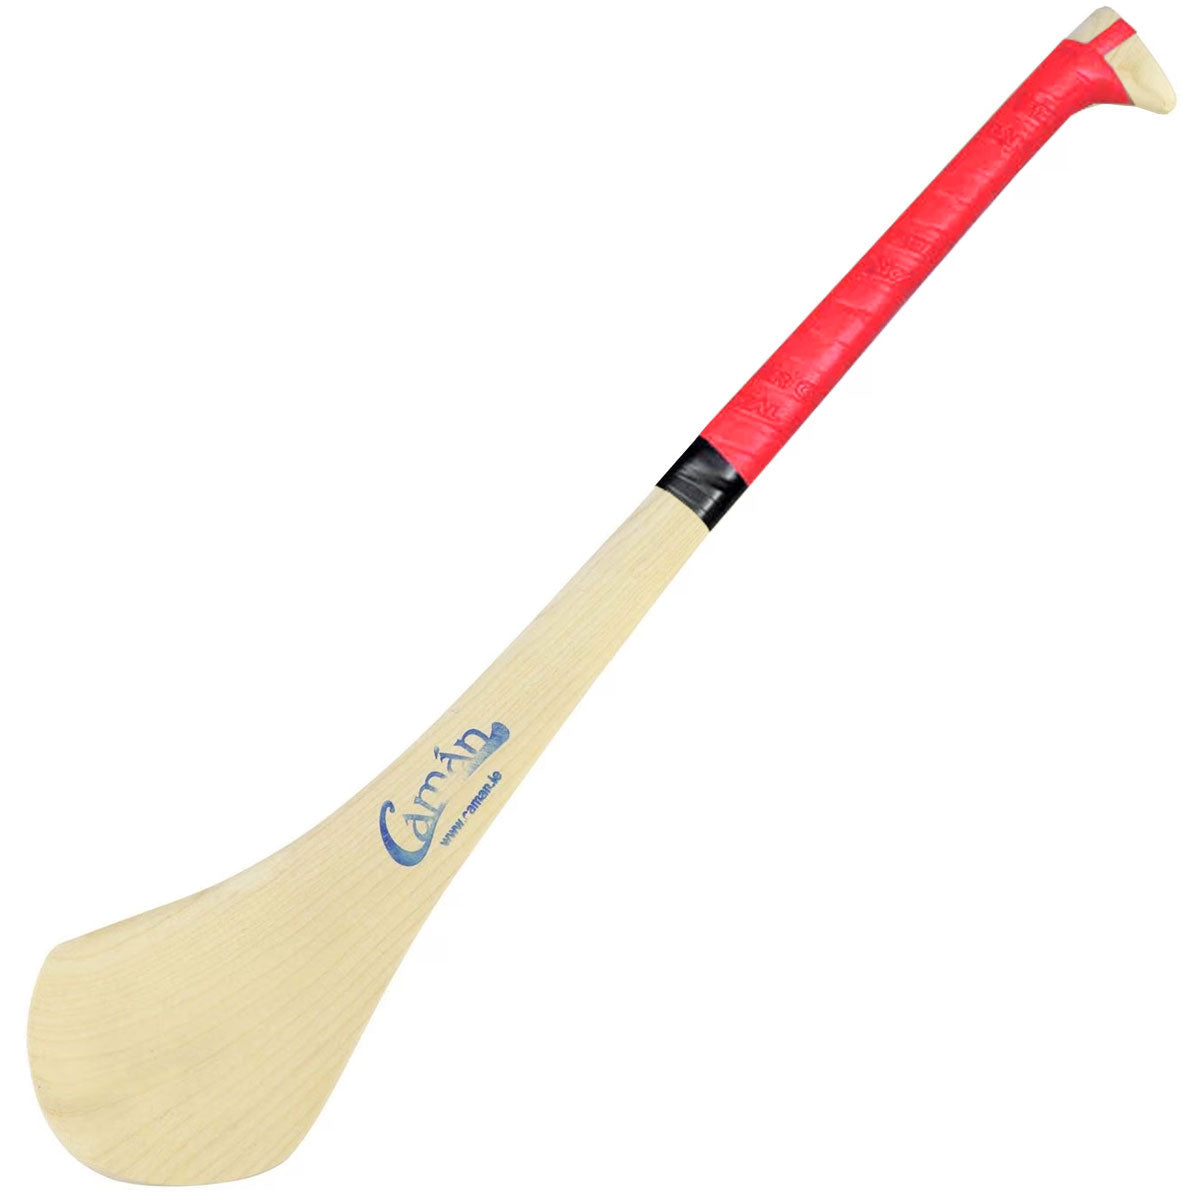 Caman Hurling Stick size 35 (Inches)